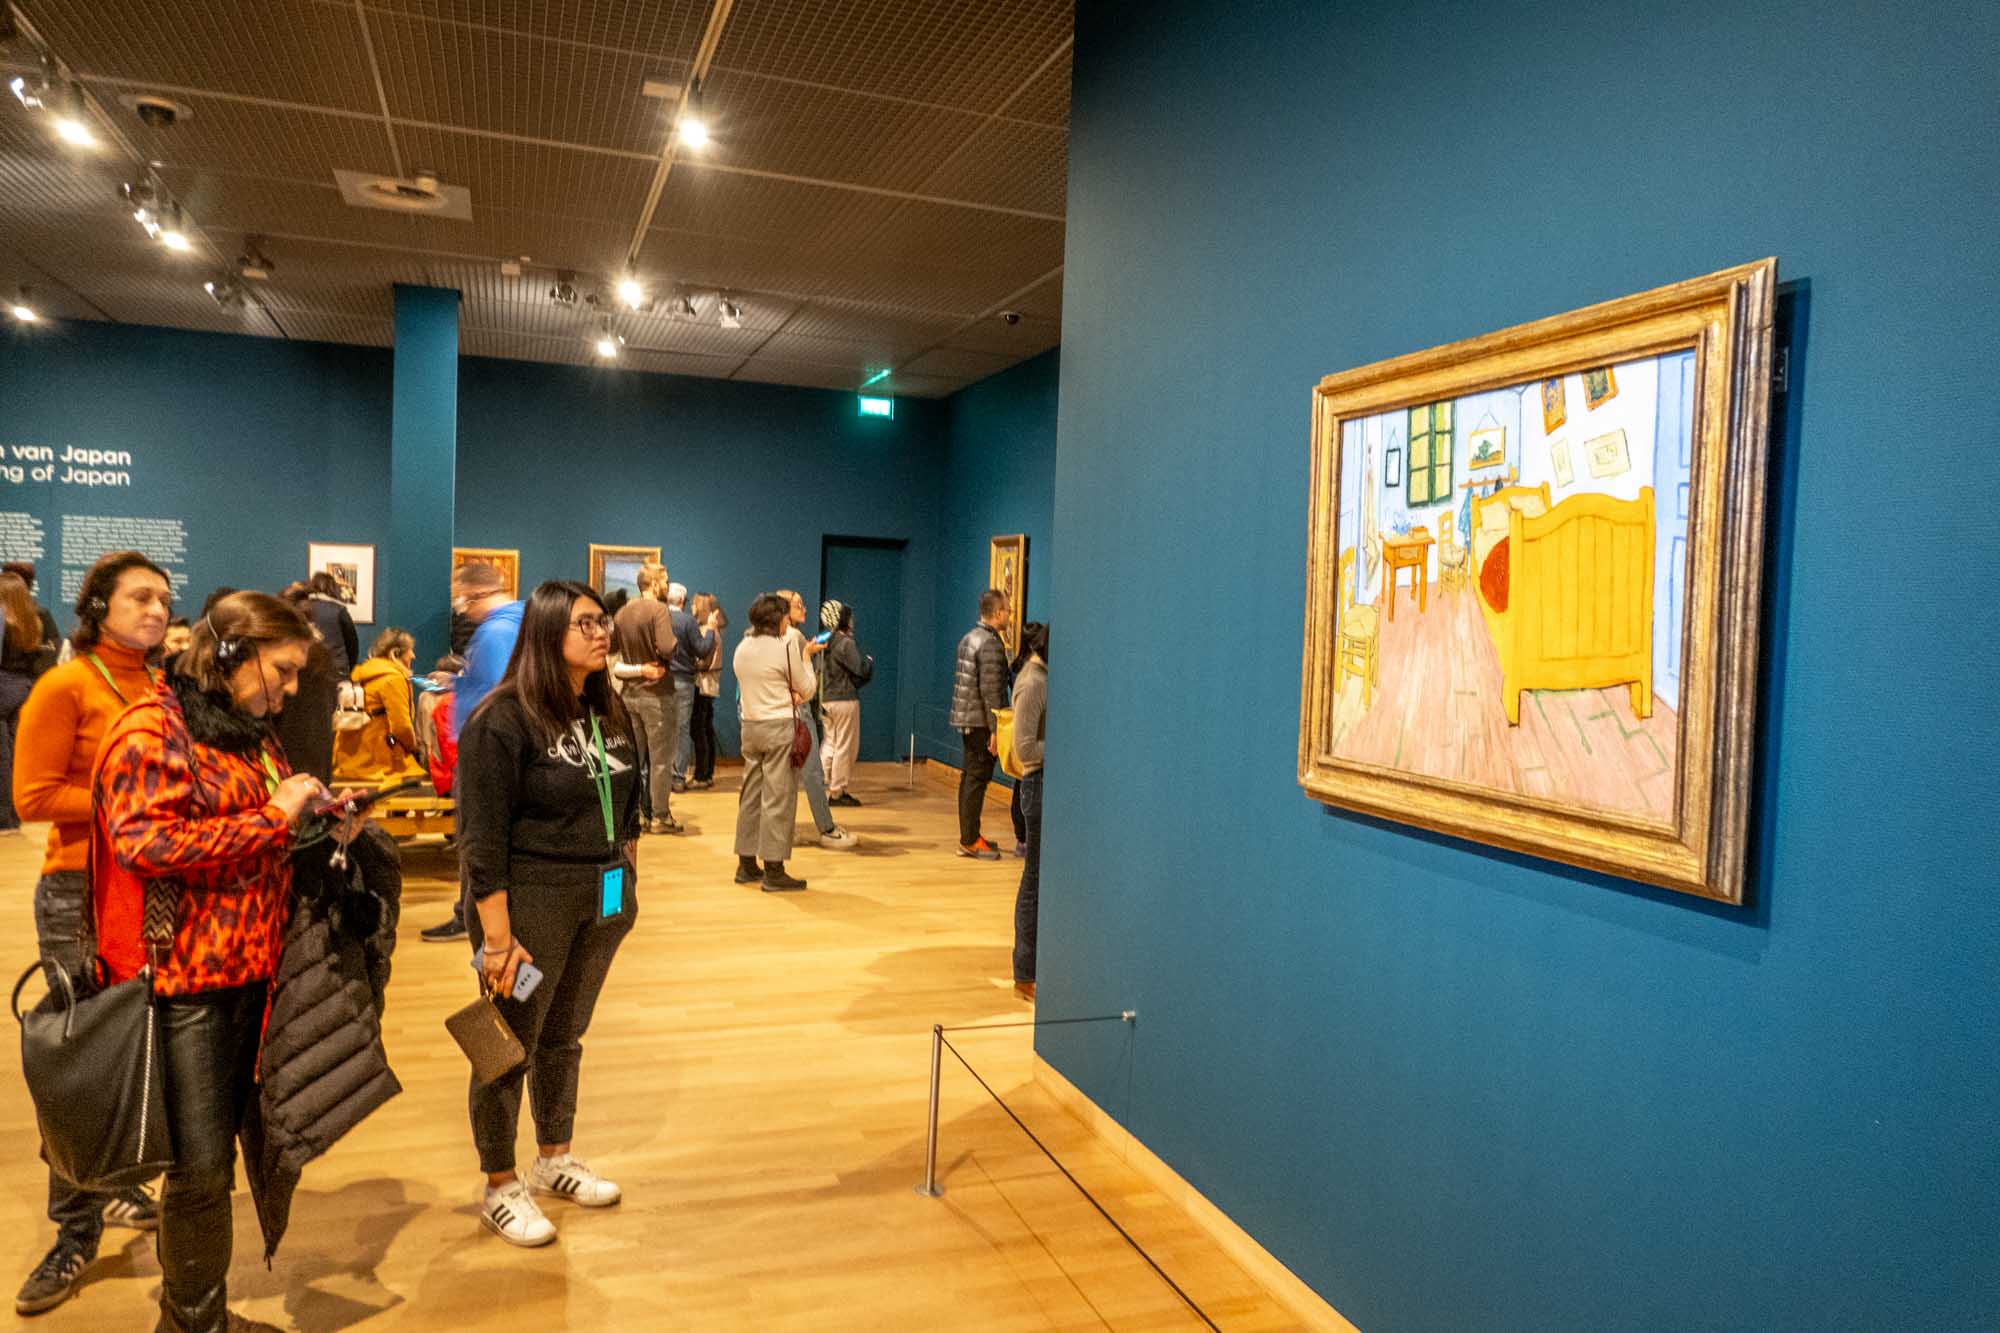 Visitors looking at a painting in the Van Gogh Museum.